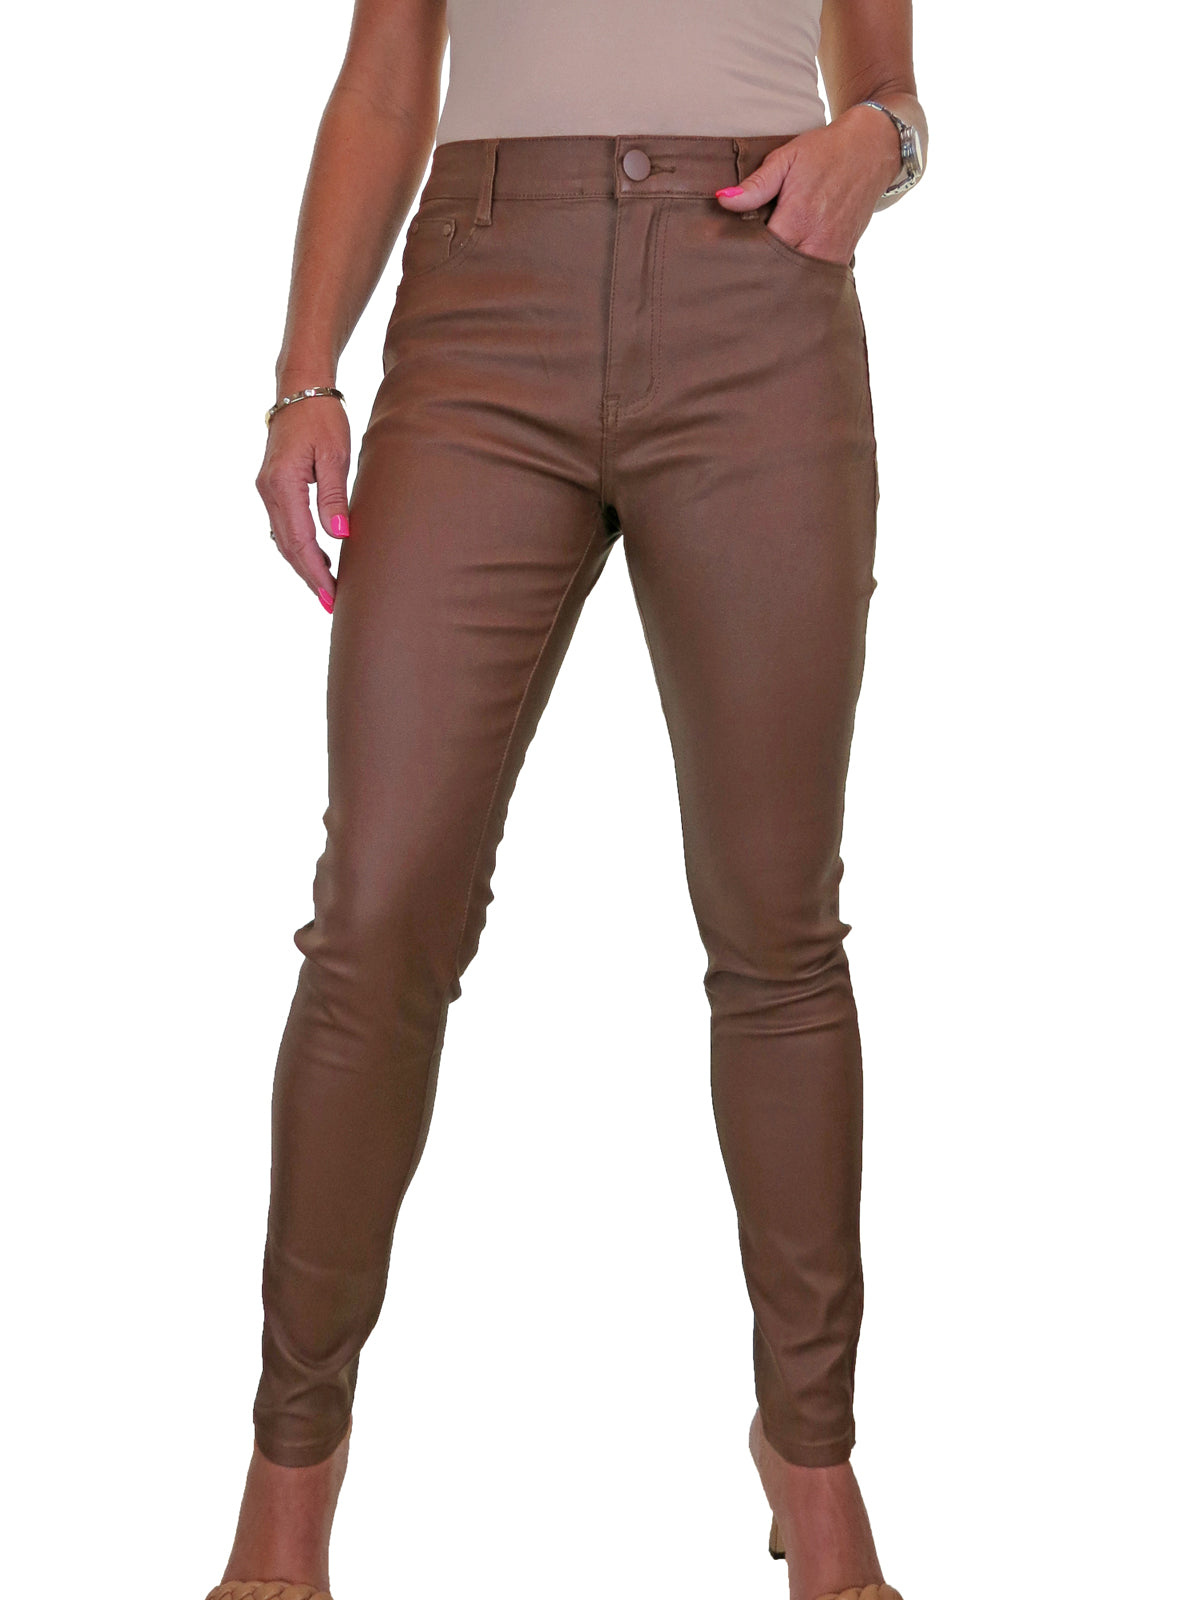 Womens High Waist Stretch Leather Look Jeans Tan